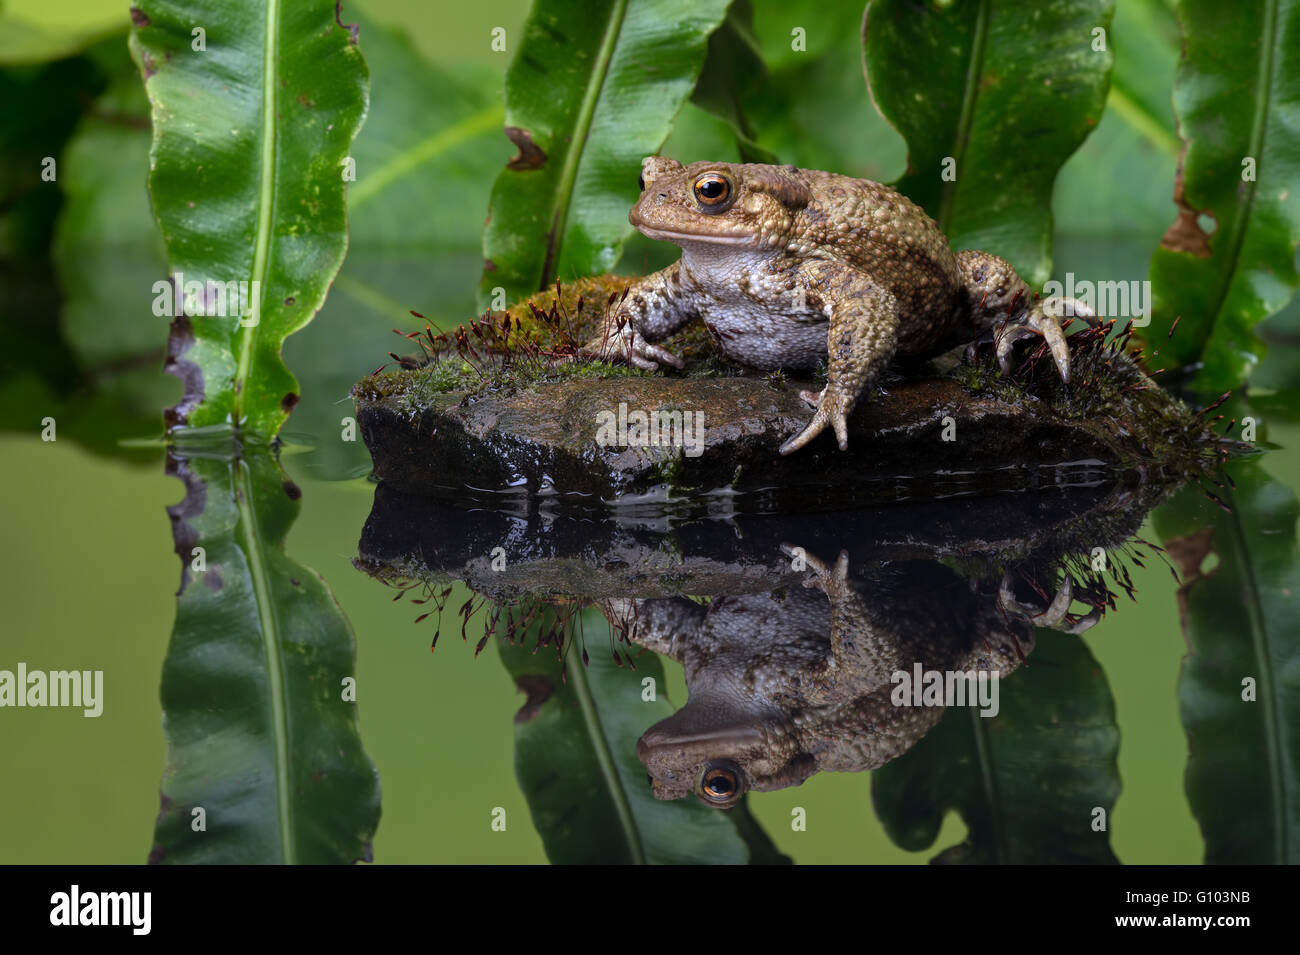 Crapaud commun (Bufo bufo) Banque D'Images